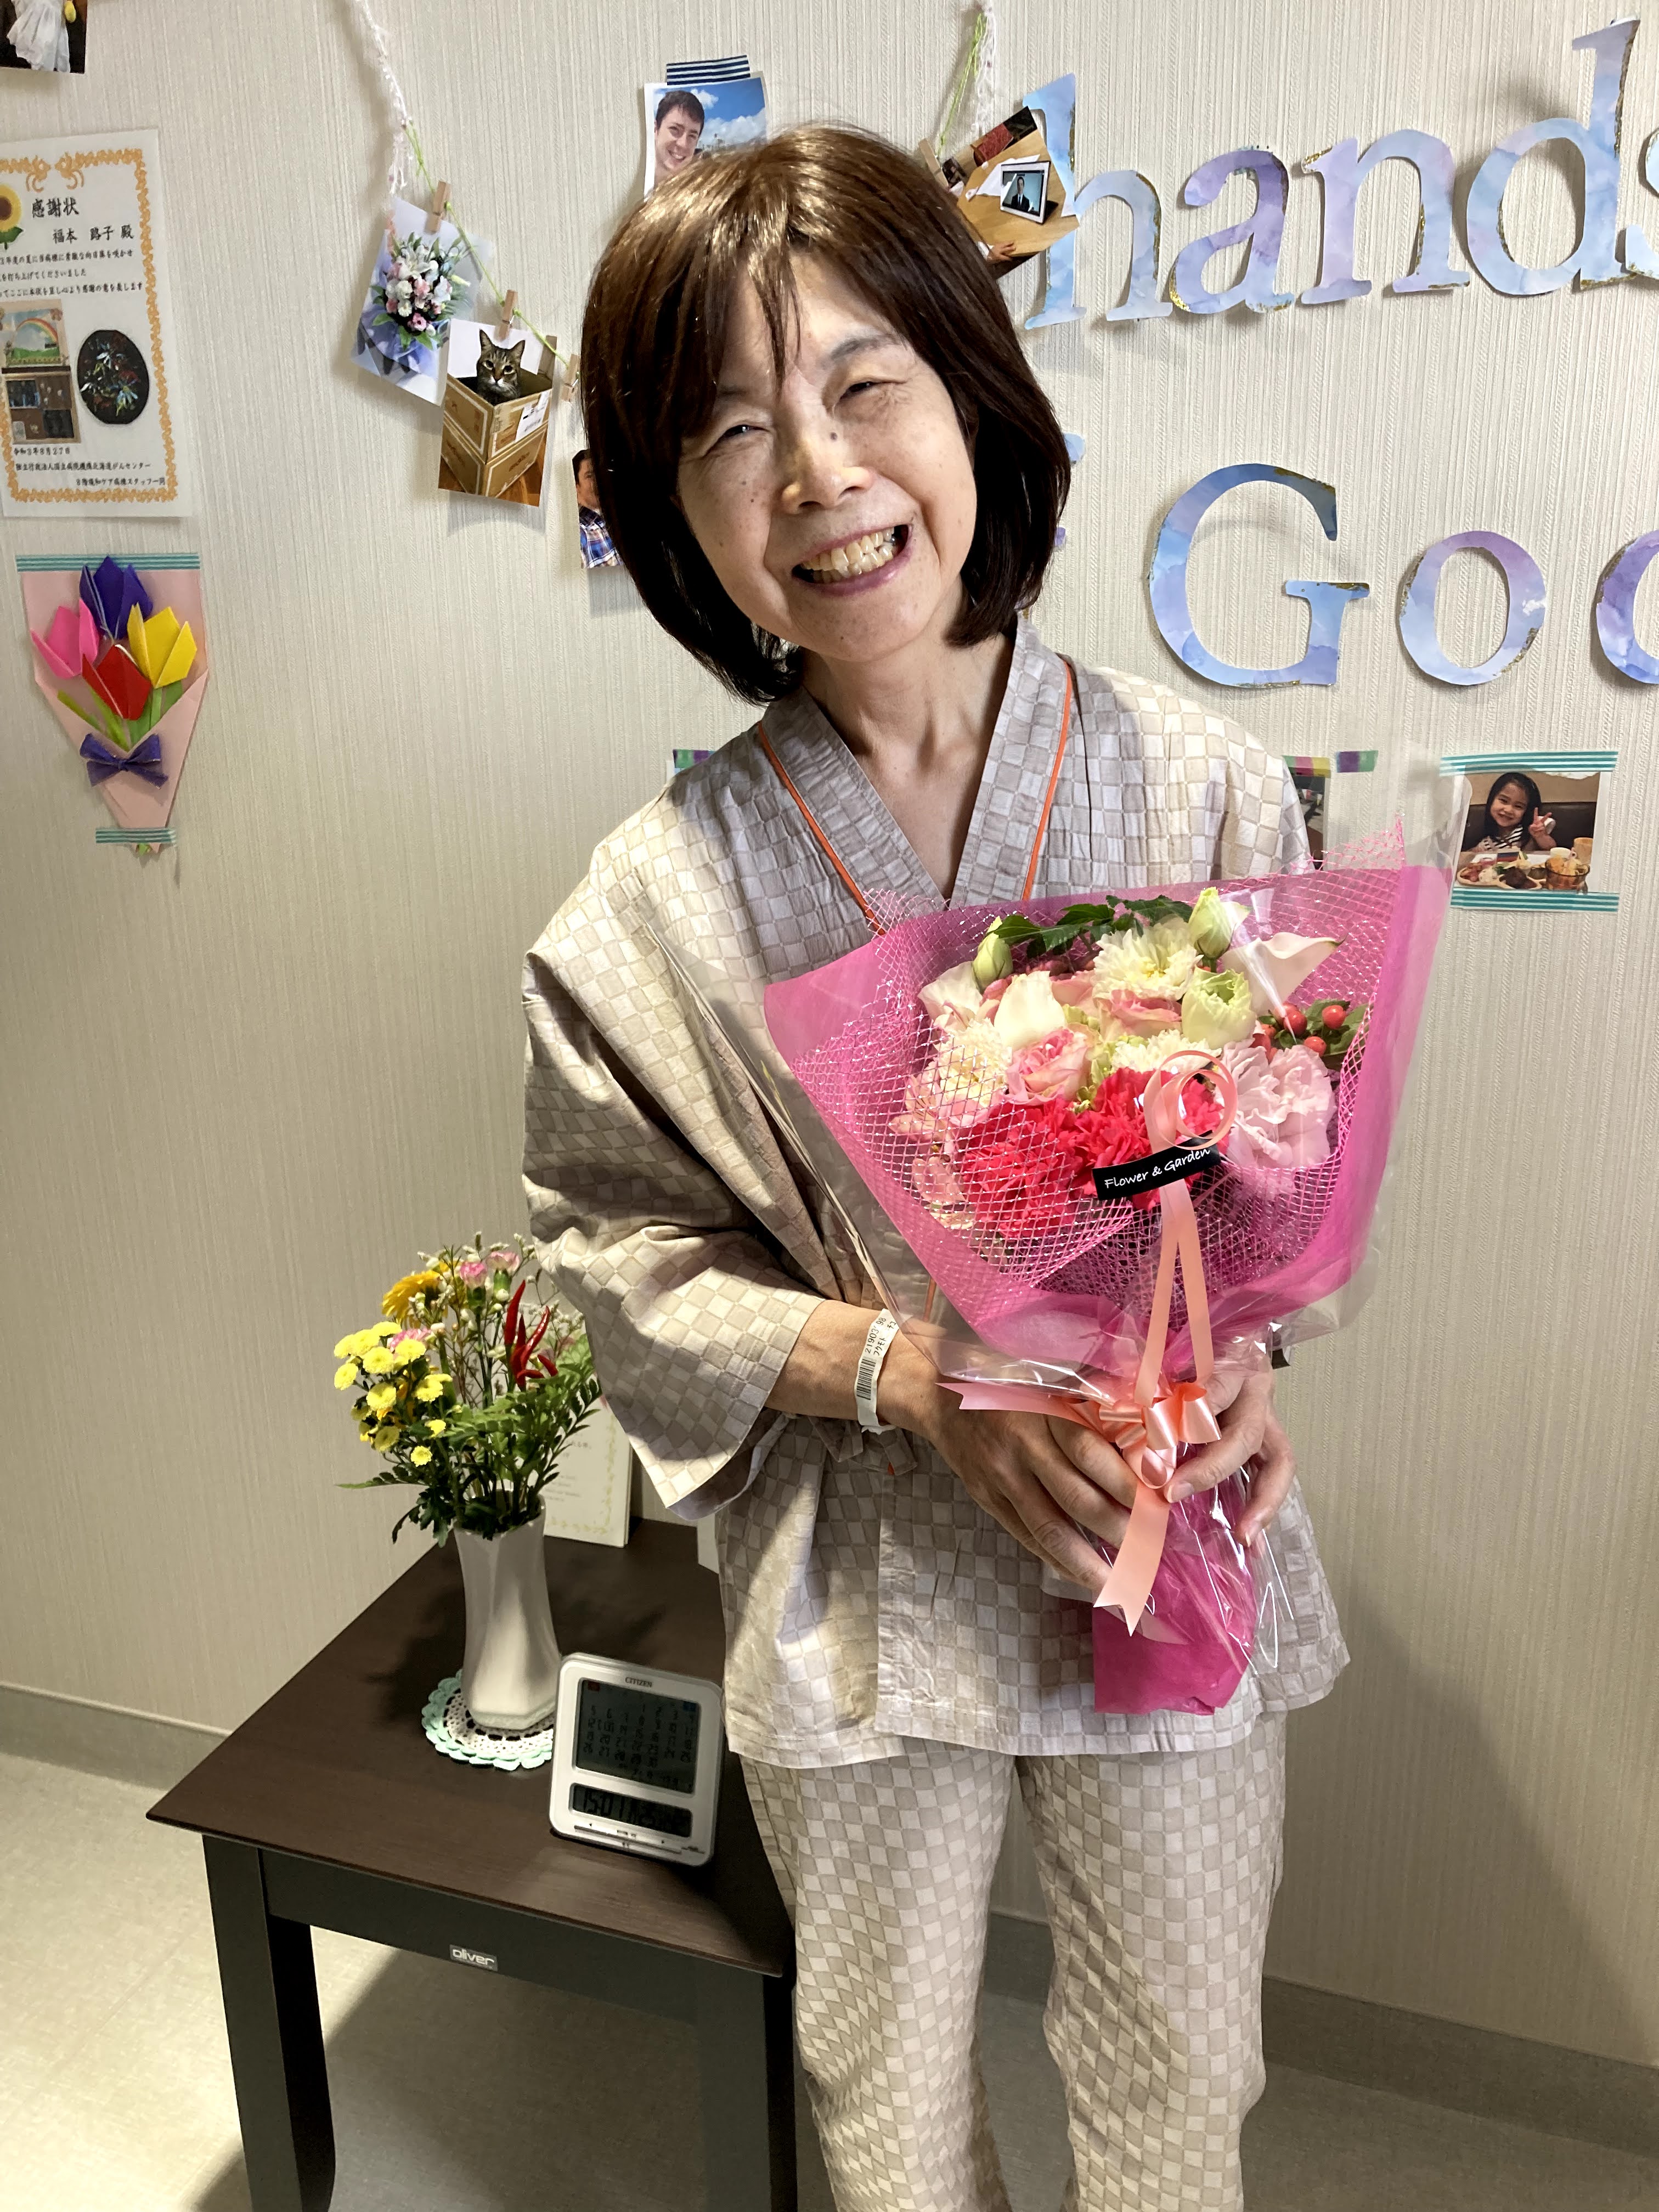 Mum holding a bunch of flowers on her birthday at the hospital